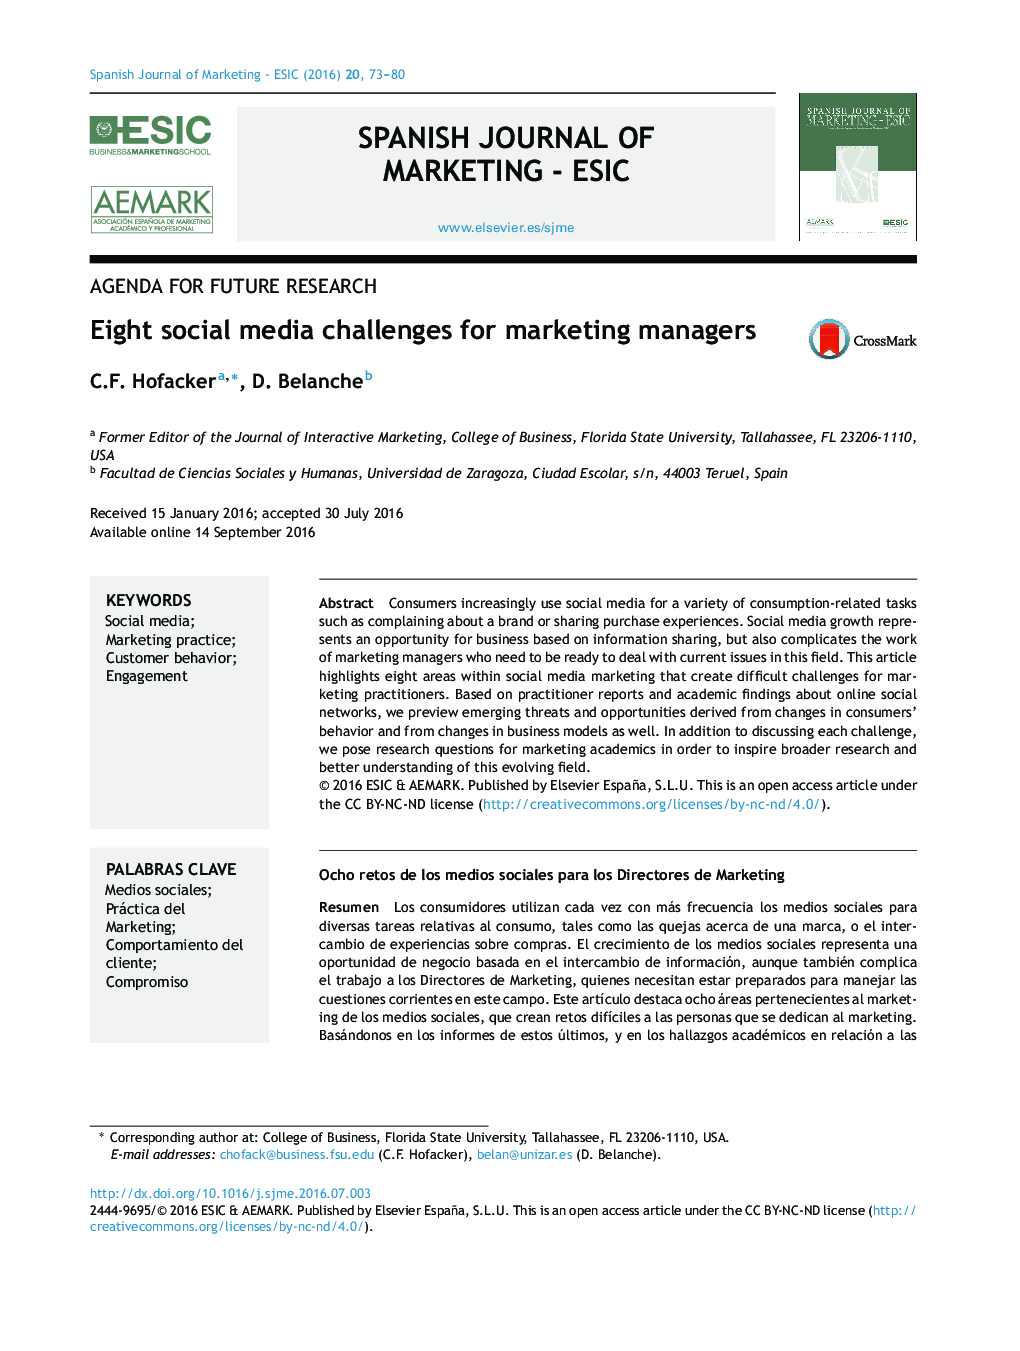 Eight social media challenges for marketing managers